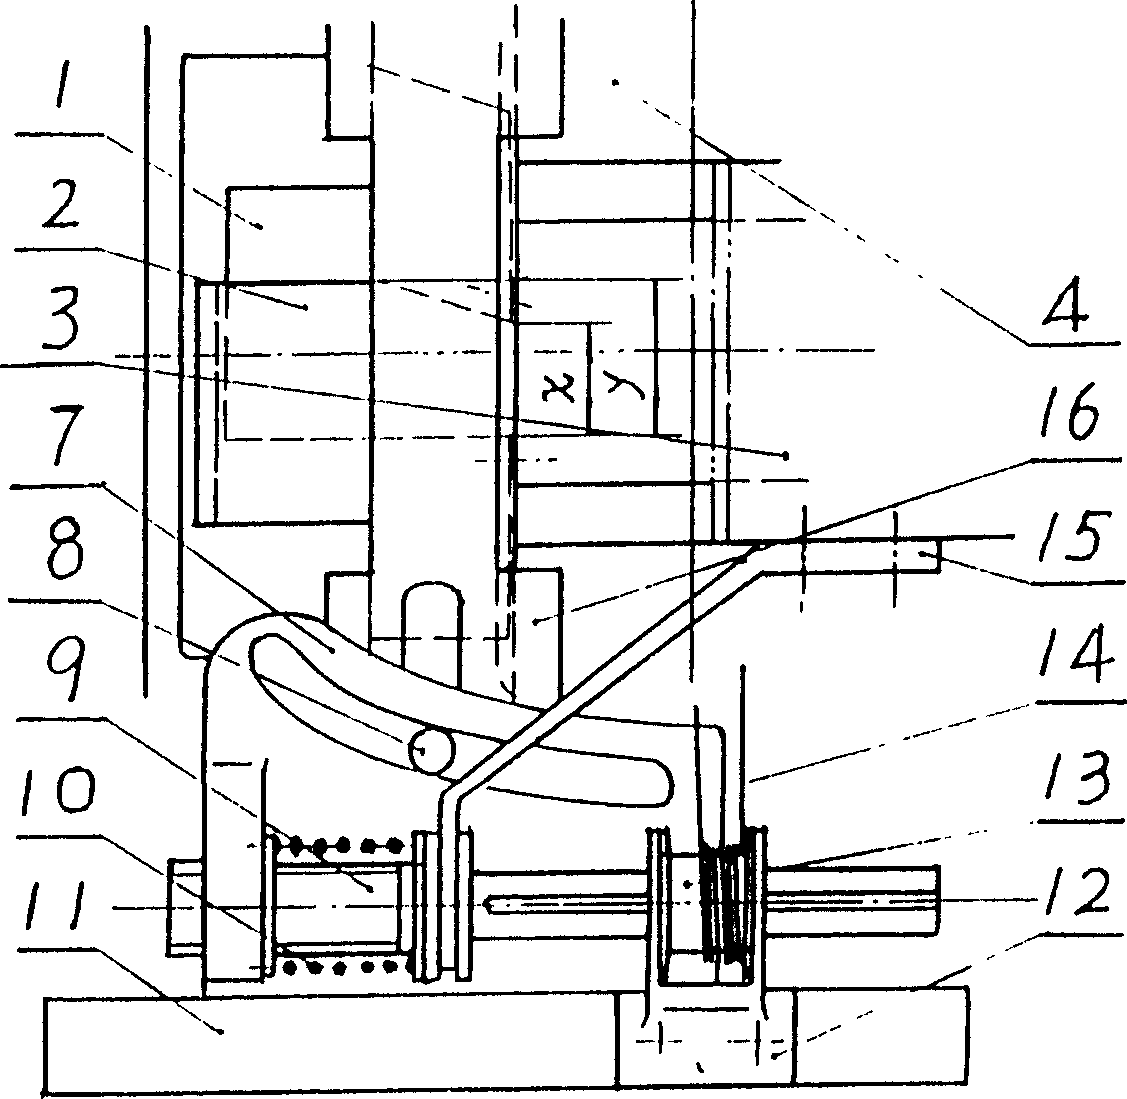 Fuel Oil distribution system for adjustable nozzle-varying engine carburettor